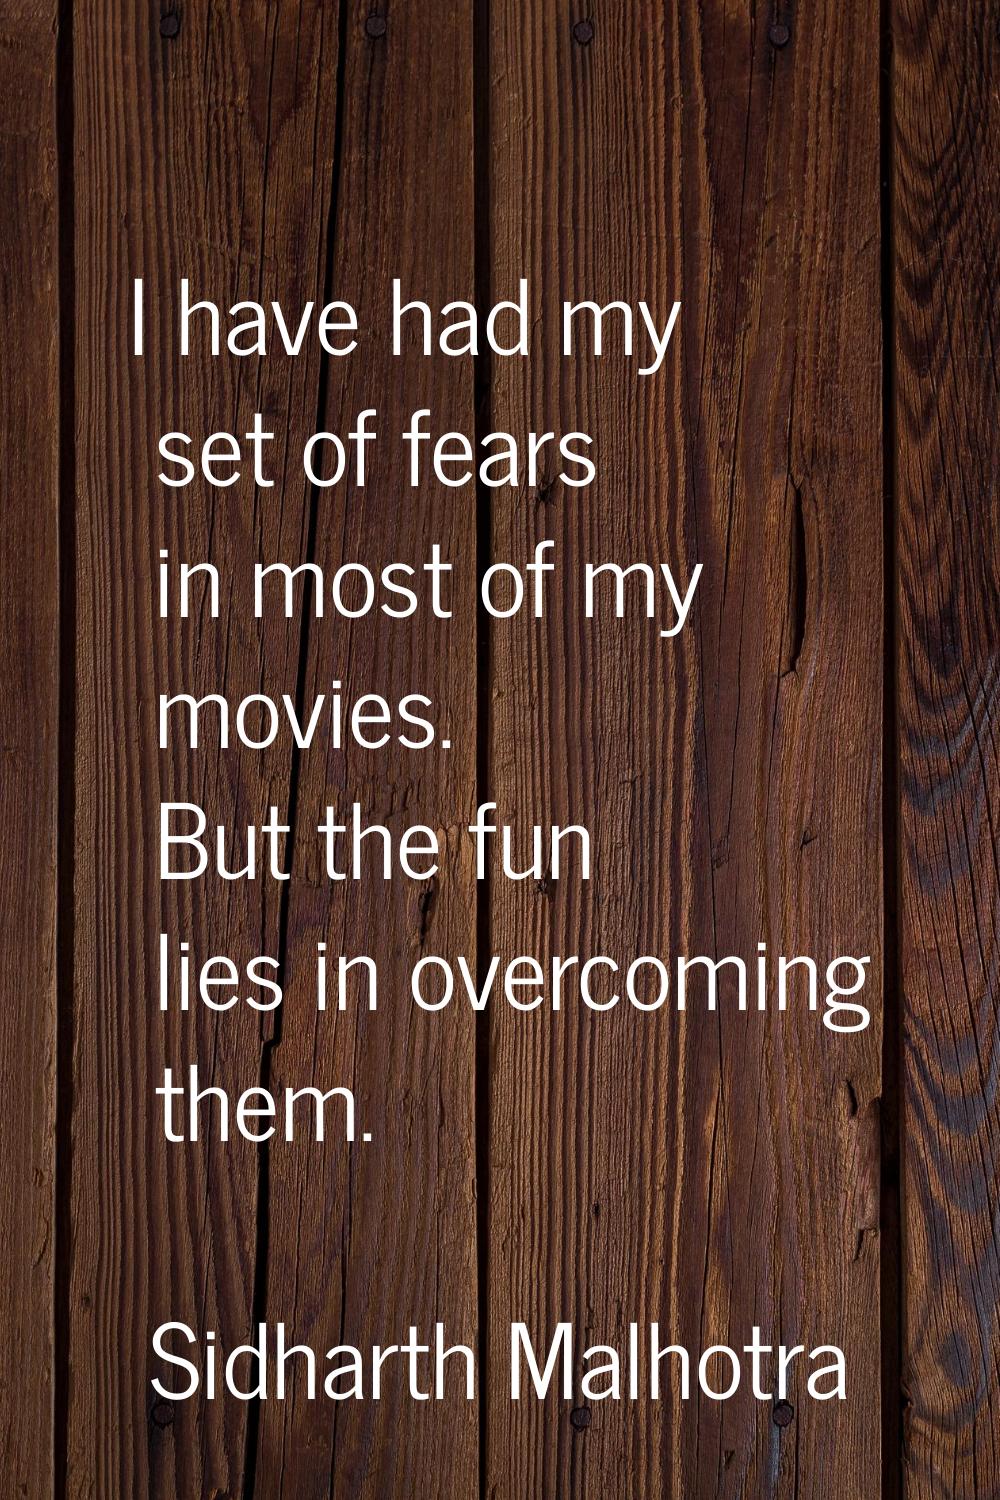 I have had my set of fears in most of my movies. But the fun lies in overcoming them.